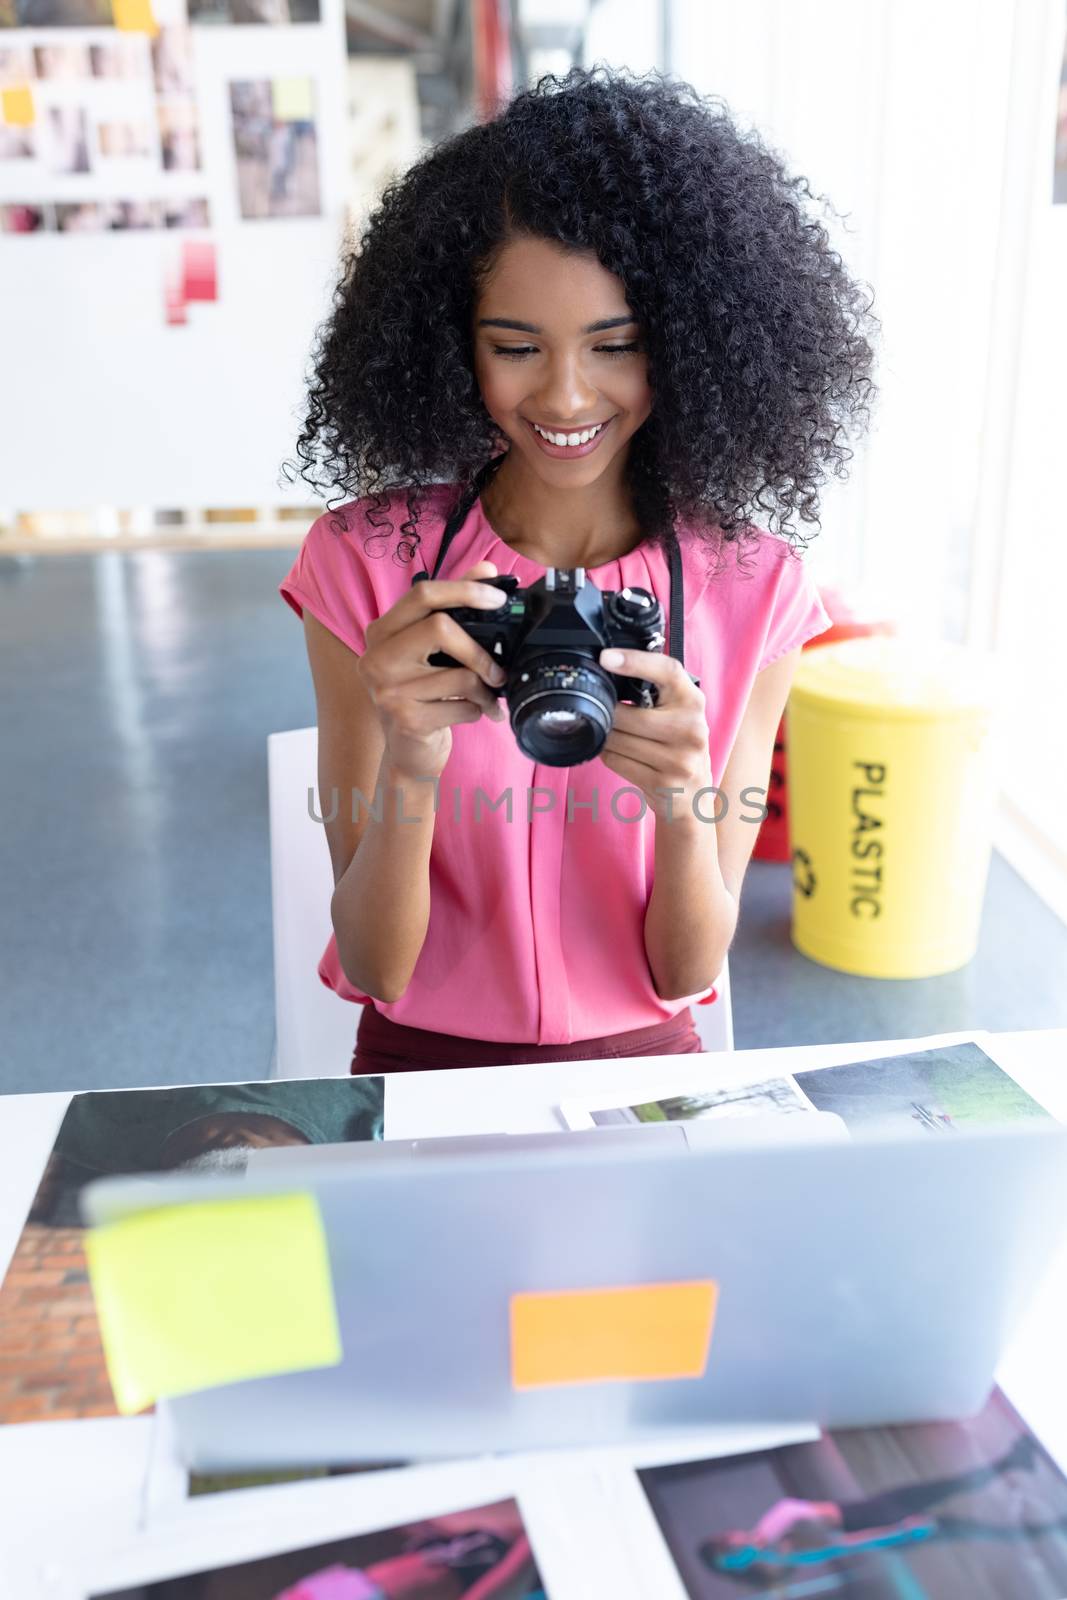 Front view of African american female graphic designer reviewing photos on digital camera at desk in office. This is a casual creative start-up business office for a diverse team